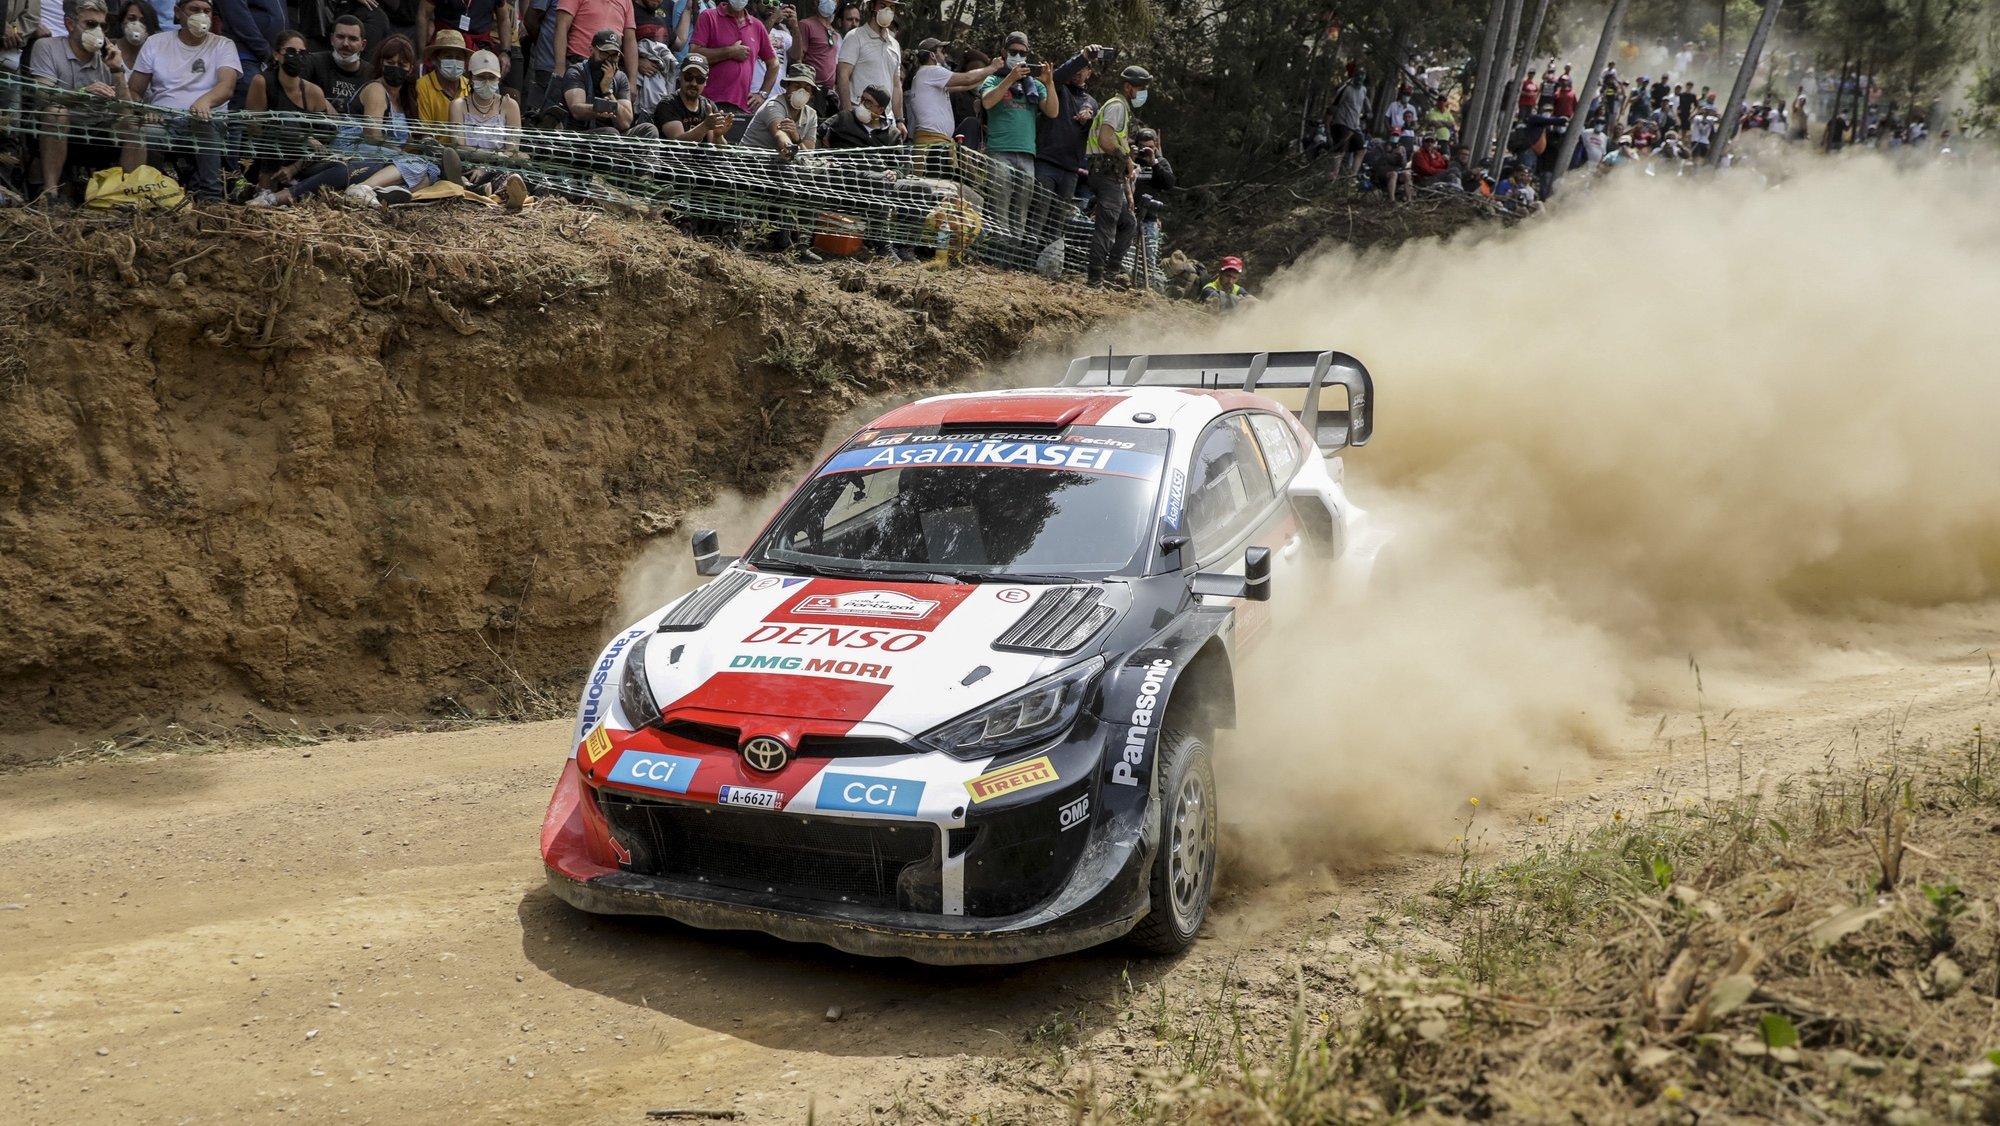 Sebastien Ogier of France drives his Toyota GR Yaris Rally 1 during the SS5 of the Rally Portugal 2022 as part of the World Rally Championship (WRC) in Lousa, Portugal, 20 May 2022. PAULO NOVAIS/LUSA